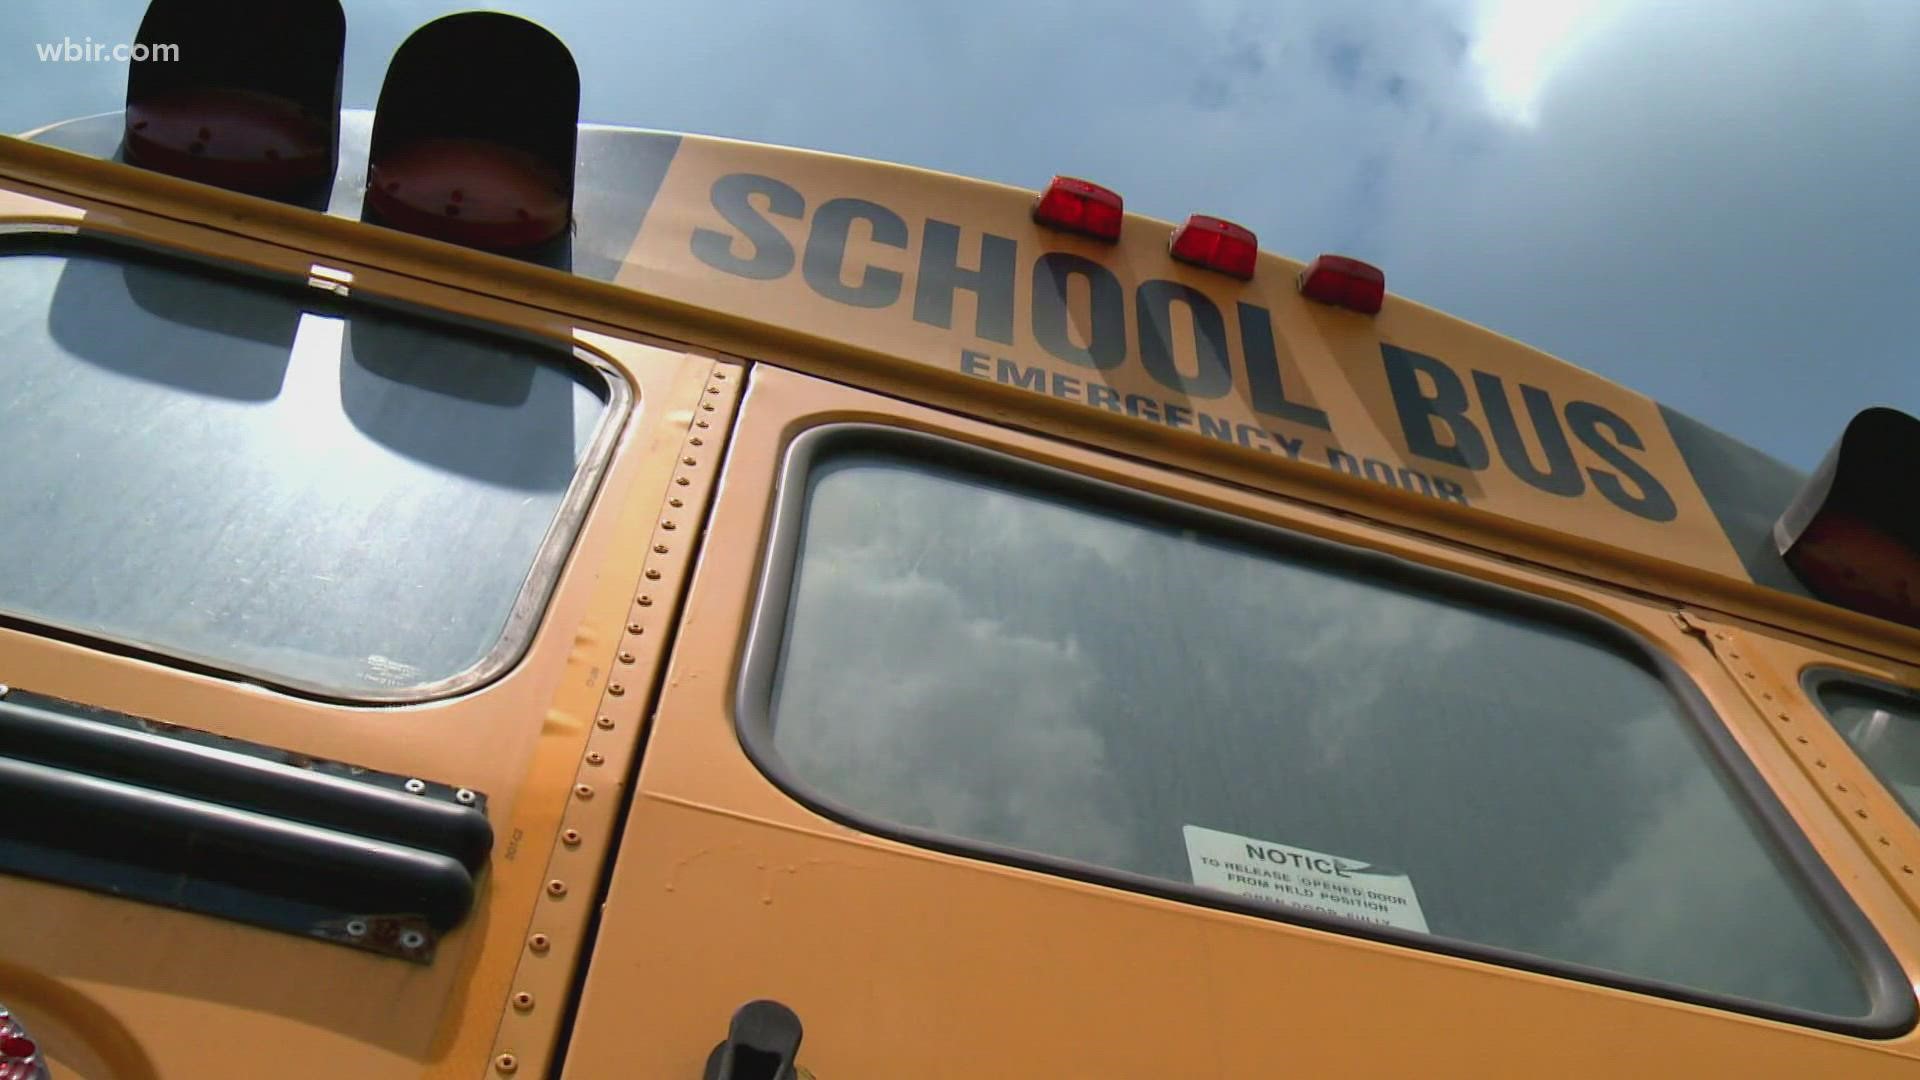 School bus contractors held an emergency meeting on Saturday about a federal judge's orders for Knox County Schools to institute a mask mandate.